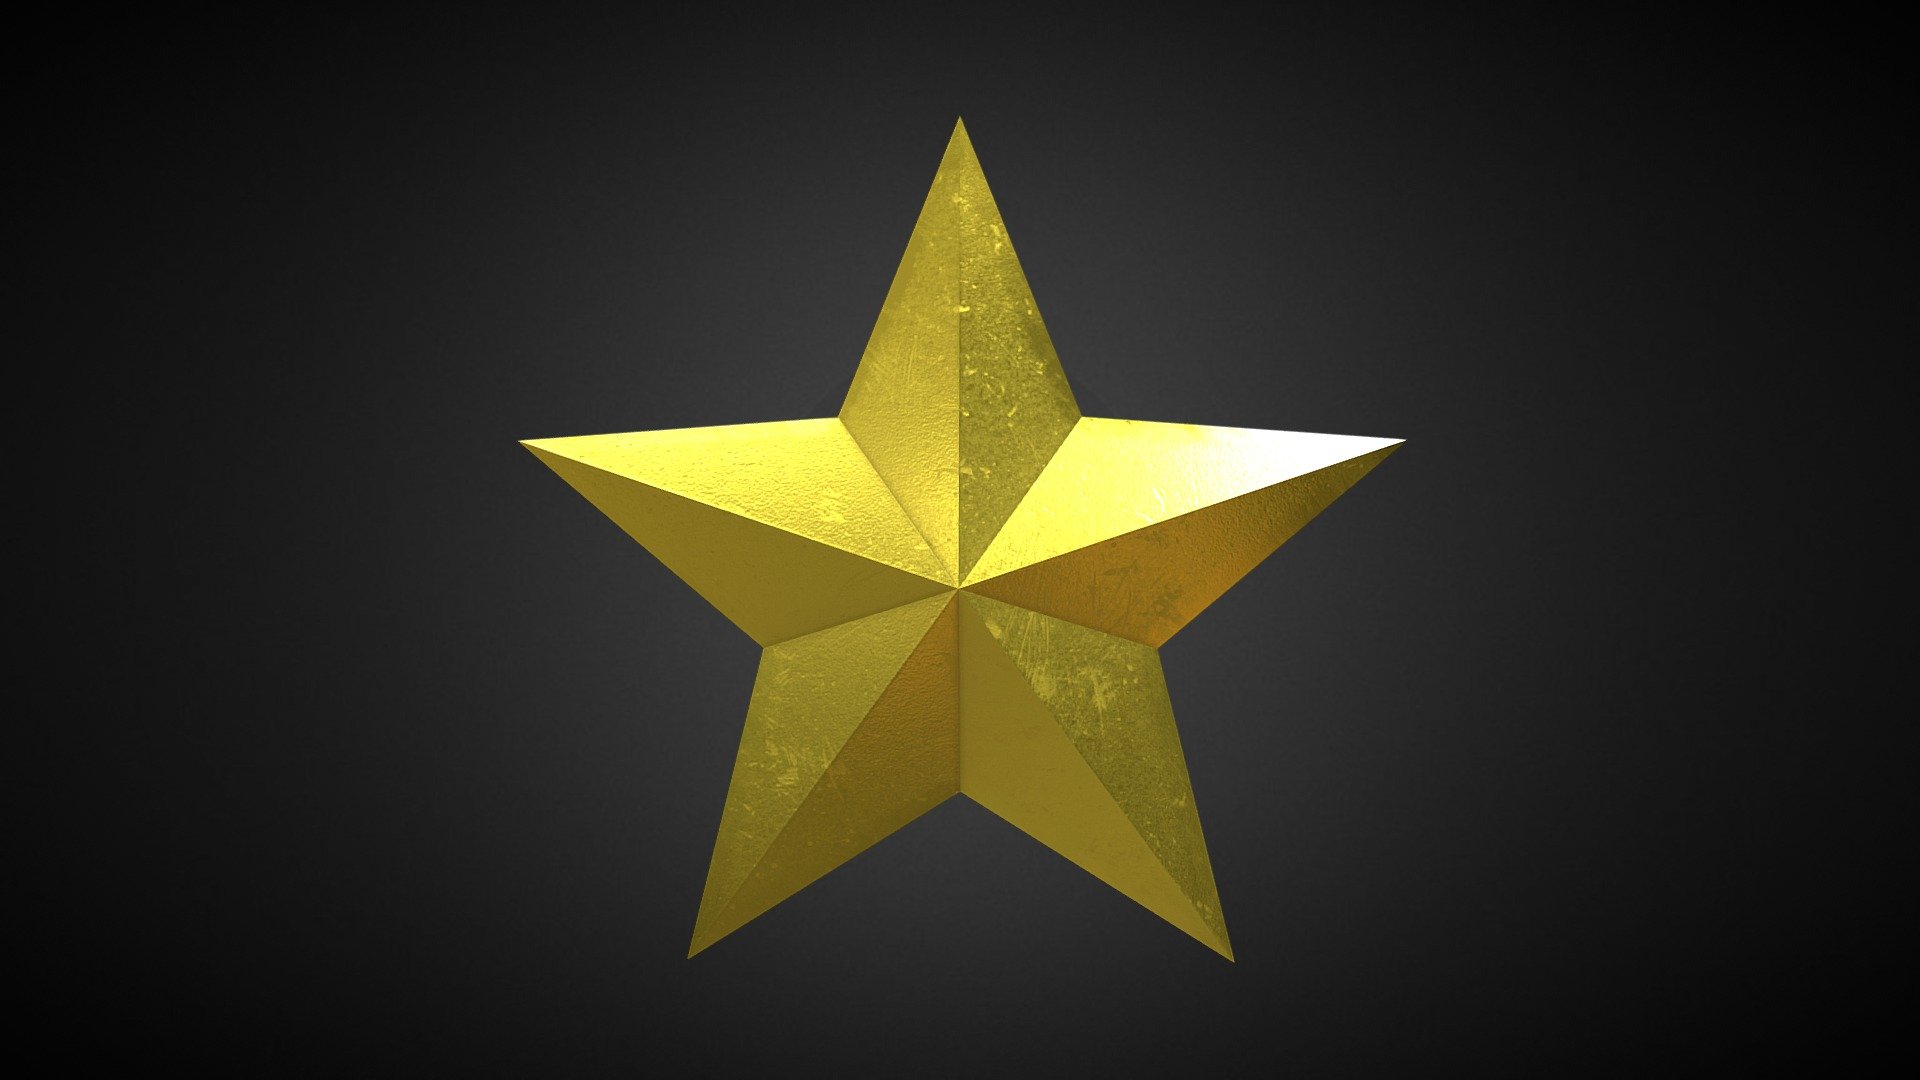 A 3D star textured with gold.

Low Poly, and free to download 3d model